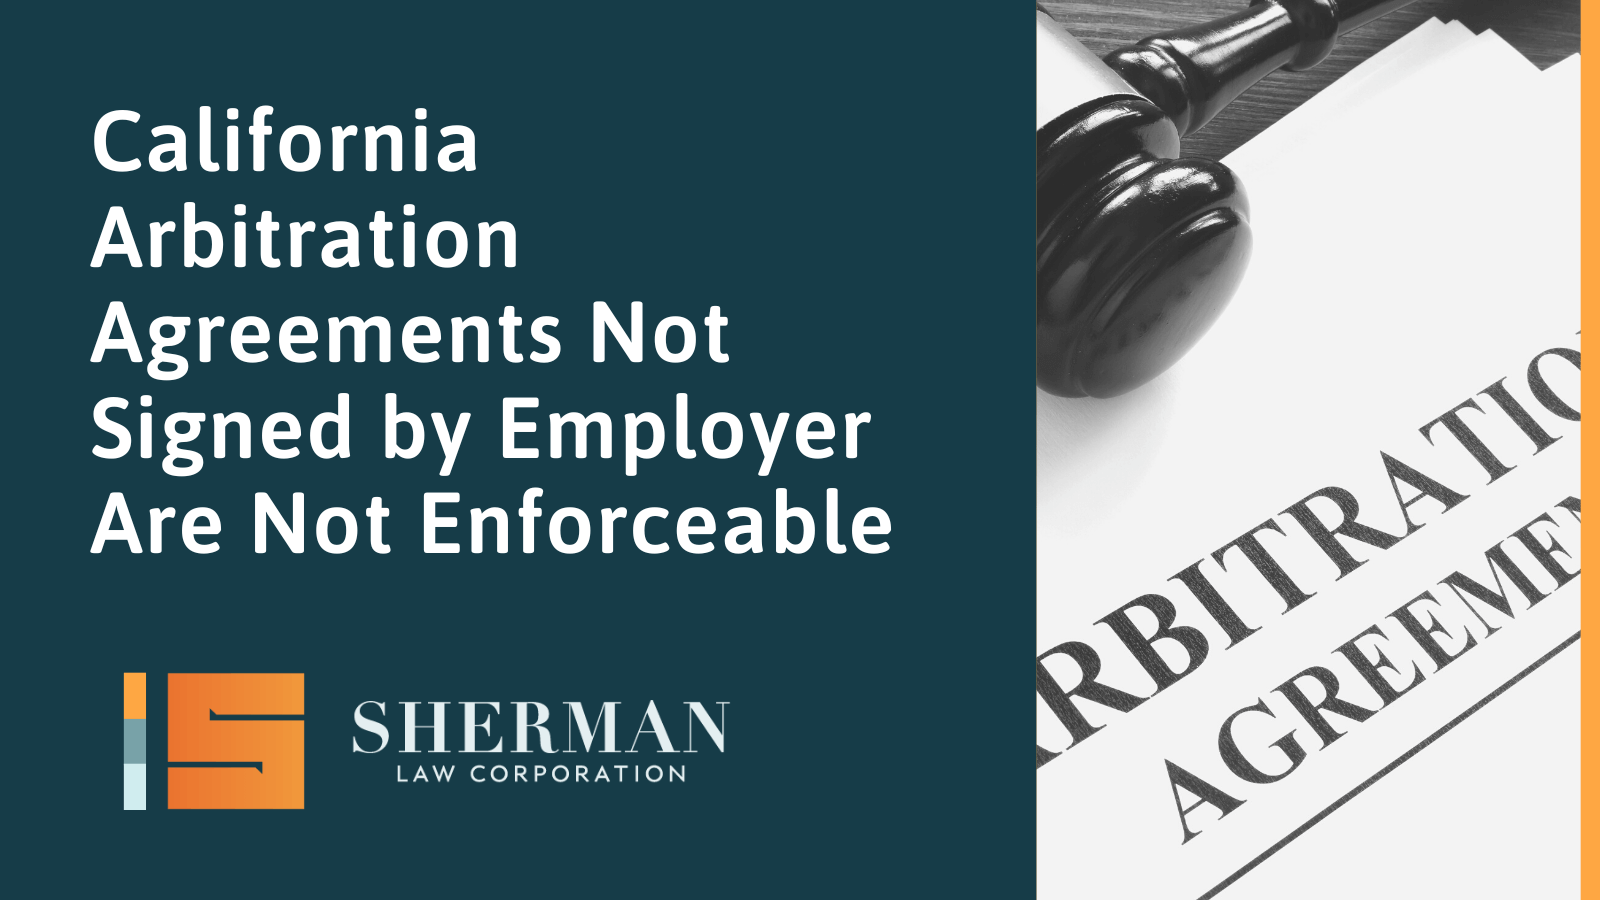 California Arbitration Agreements Not Signed by Employer Are Not Enforceable - callifornia employment law - sherman law corporation